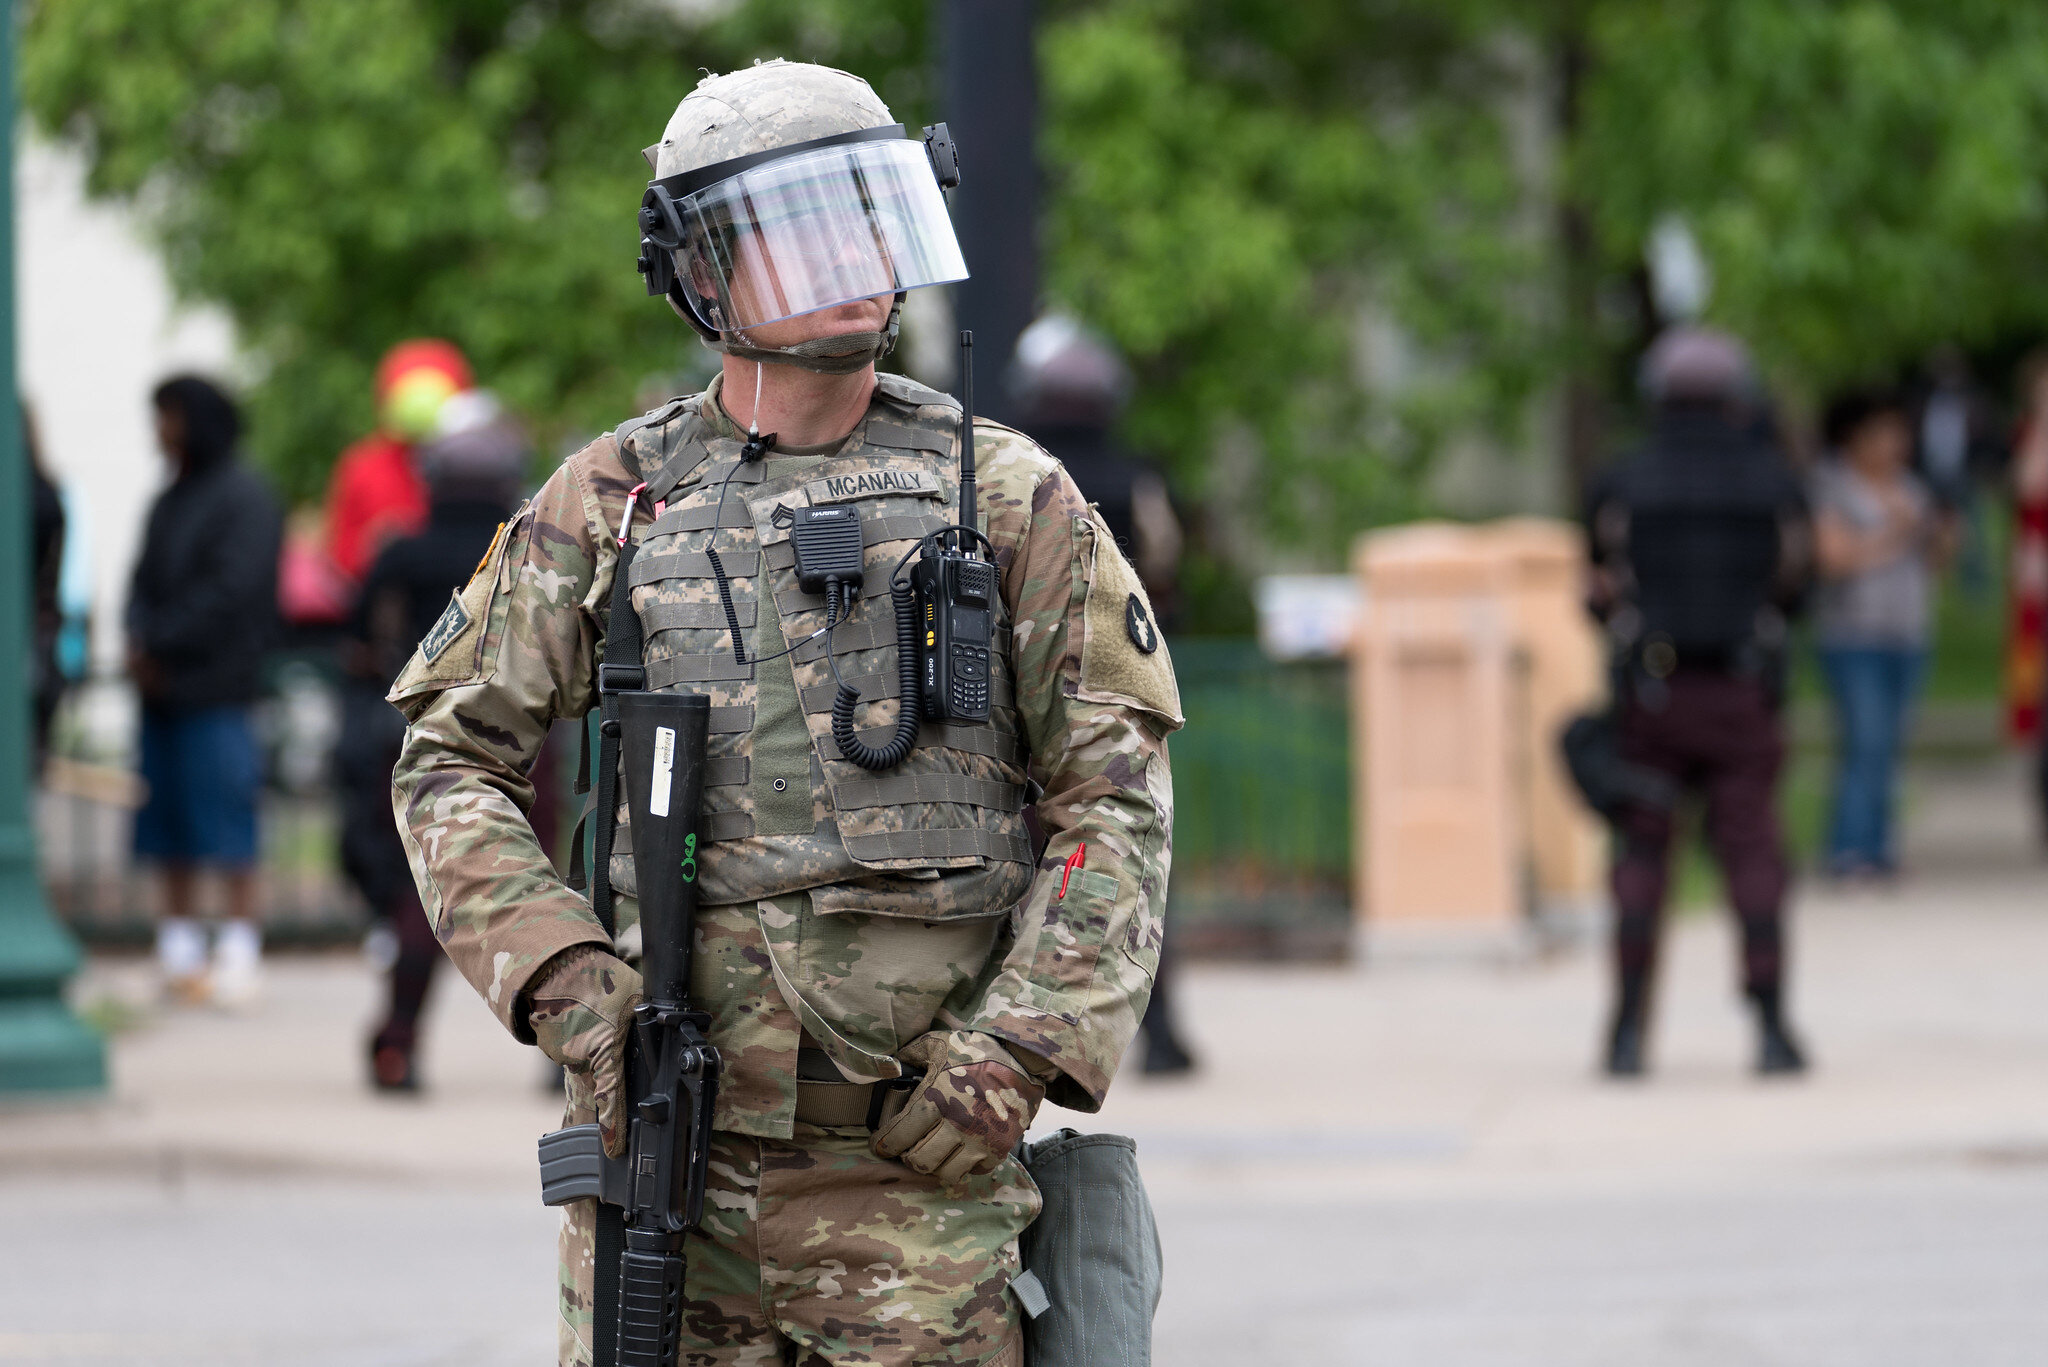  A National Guardsman stands at E Lake St and 29th Ave S in Minneapolis, Minnesota 